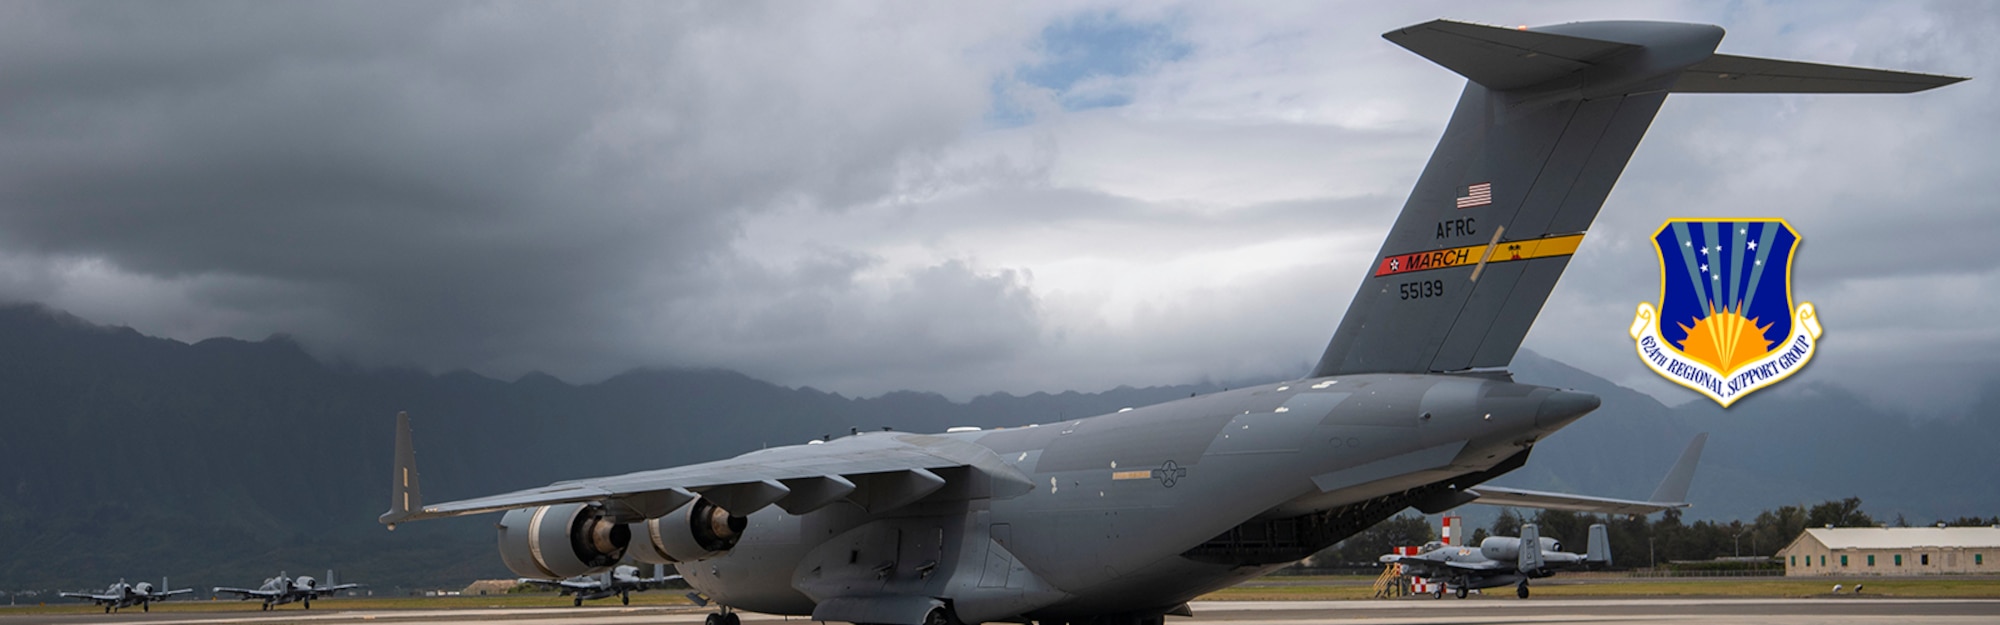 A C-17 from March Air Reserve Base, Calif., sits on the flight line after delivering cargo and personnel in support of RIMPAC 22, Marine Corps Base Hawaii, 21 July 2022. Twenty-six nations, 38 ships, three submarines, more than 170 aircraft and 25,000 personnel - including Reserve Citizen Airmen from the 624 RSG -- are participating in #RIMPAC2022 from June 29 to Aug. 4 in and around the Hawaiian Islands and Southern California. The world's largest international maritime exercise, RIMPAC provides a unique training opportunity while fostering and sustaining cooperative relationships among participants critical to ensuring the safety of sea lanes and security on the world's oceans. RIMPAC 2022 is the 28th exercise in the series that began in 1971,

which aims to strengthen partners' collective forces and promote a free and open Indo-Pacific.